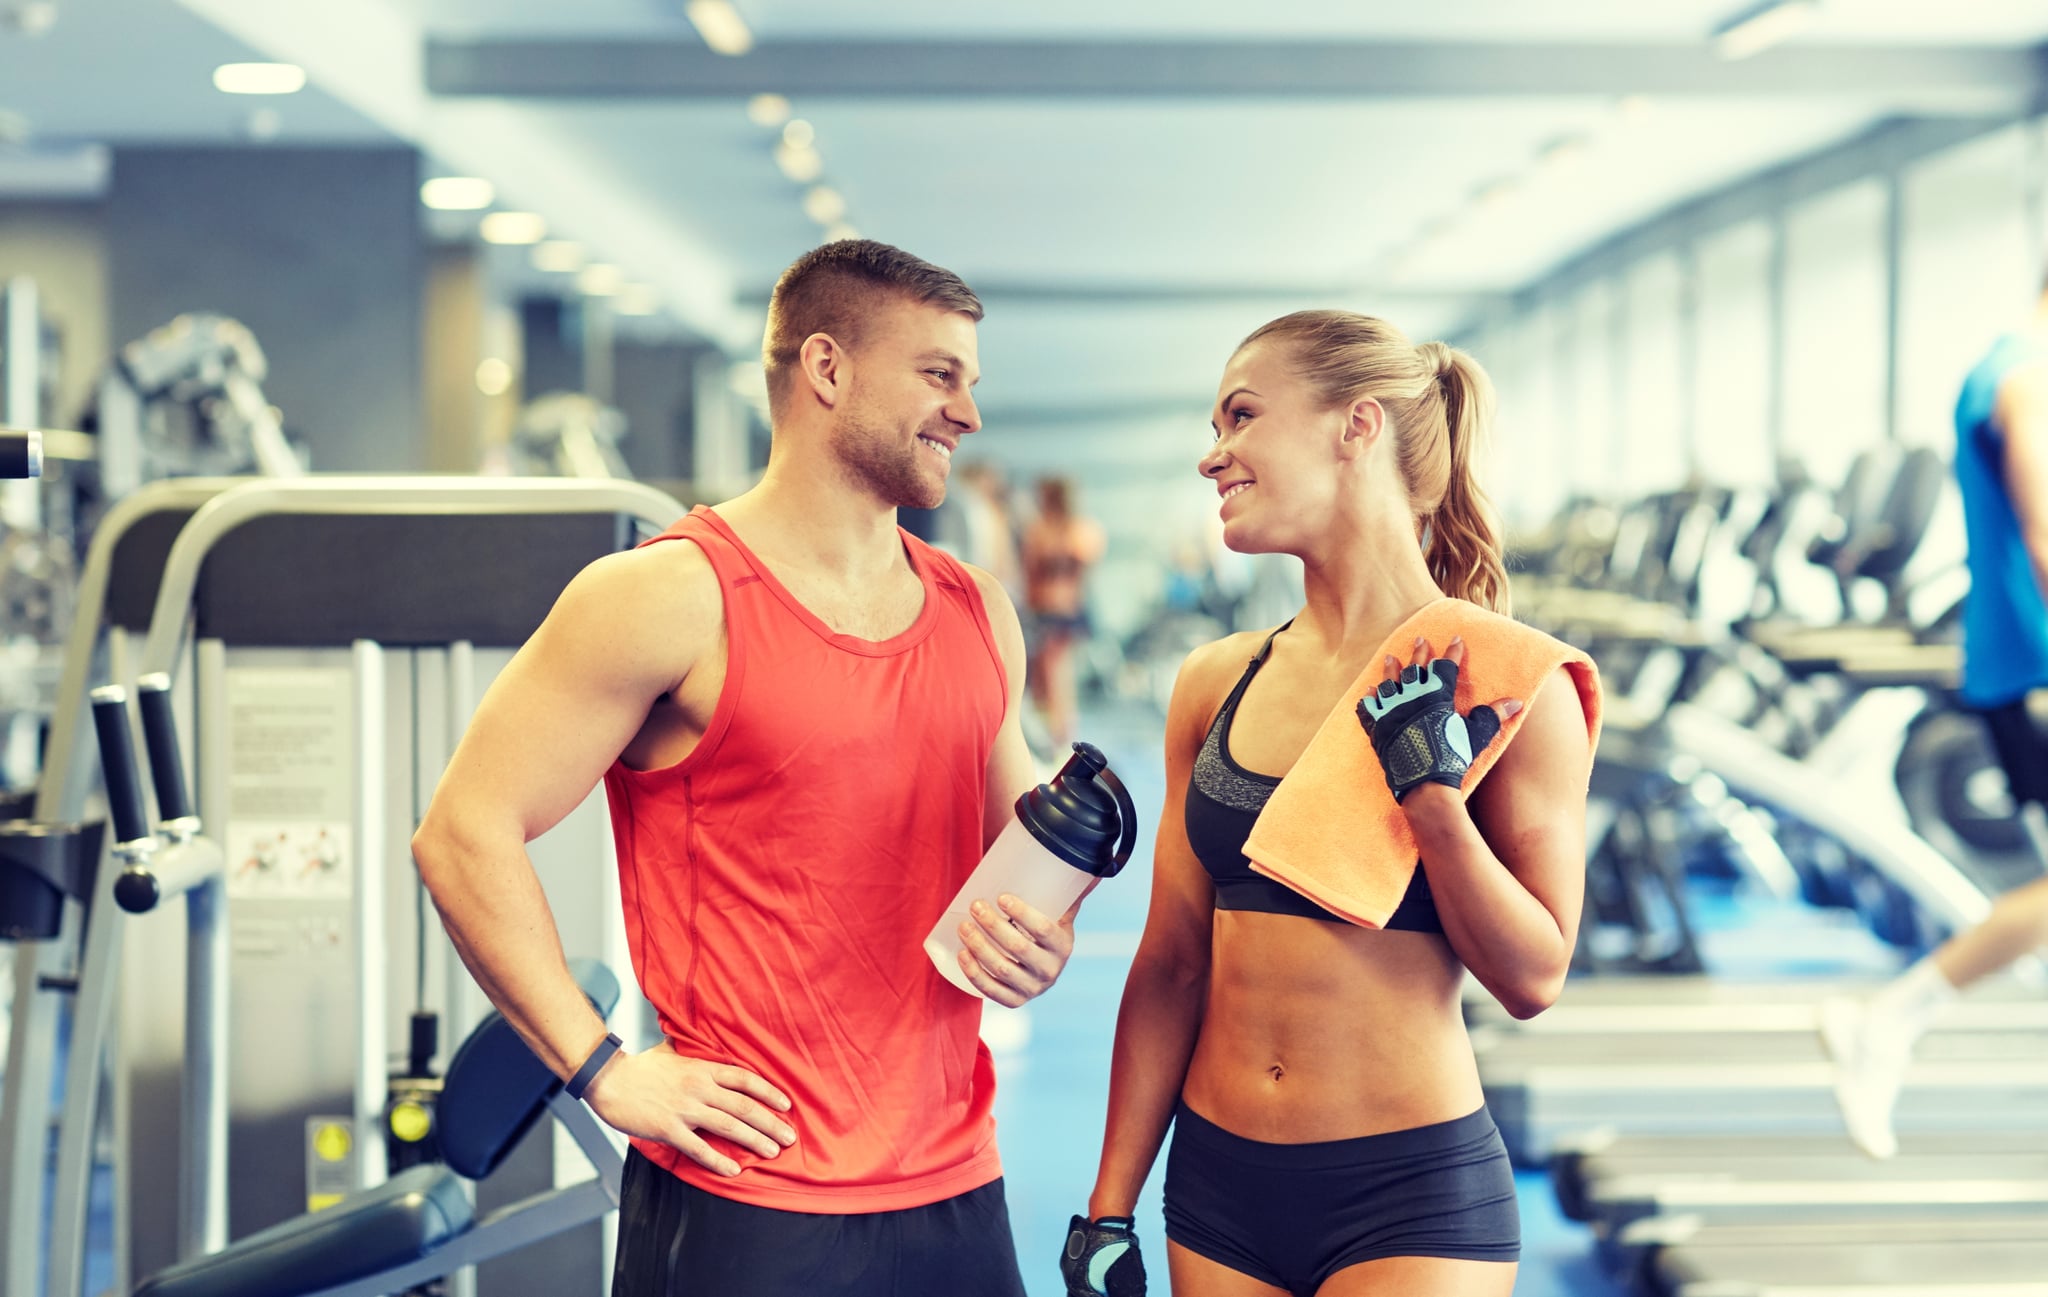 How to Flirt at the Gym Without Making Things Awkward.